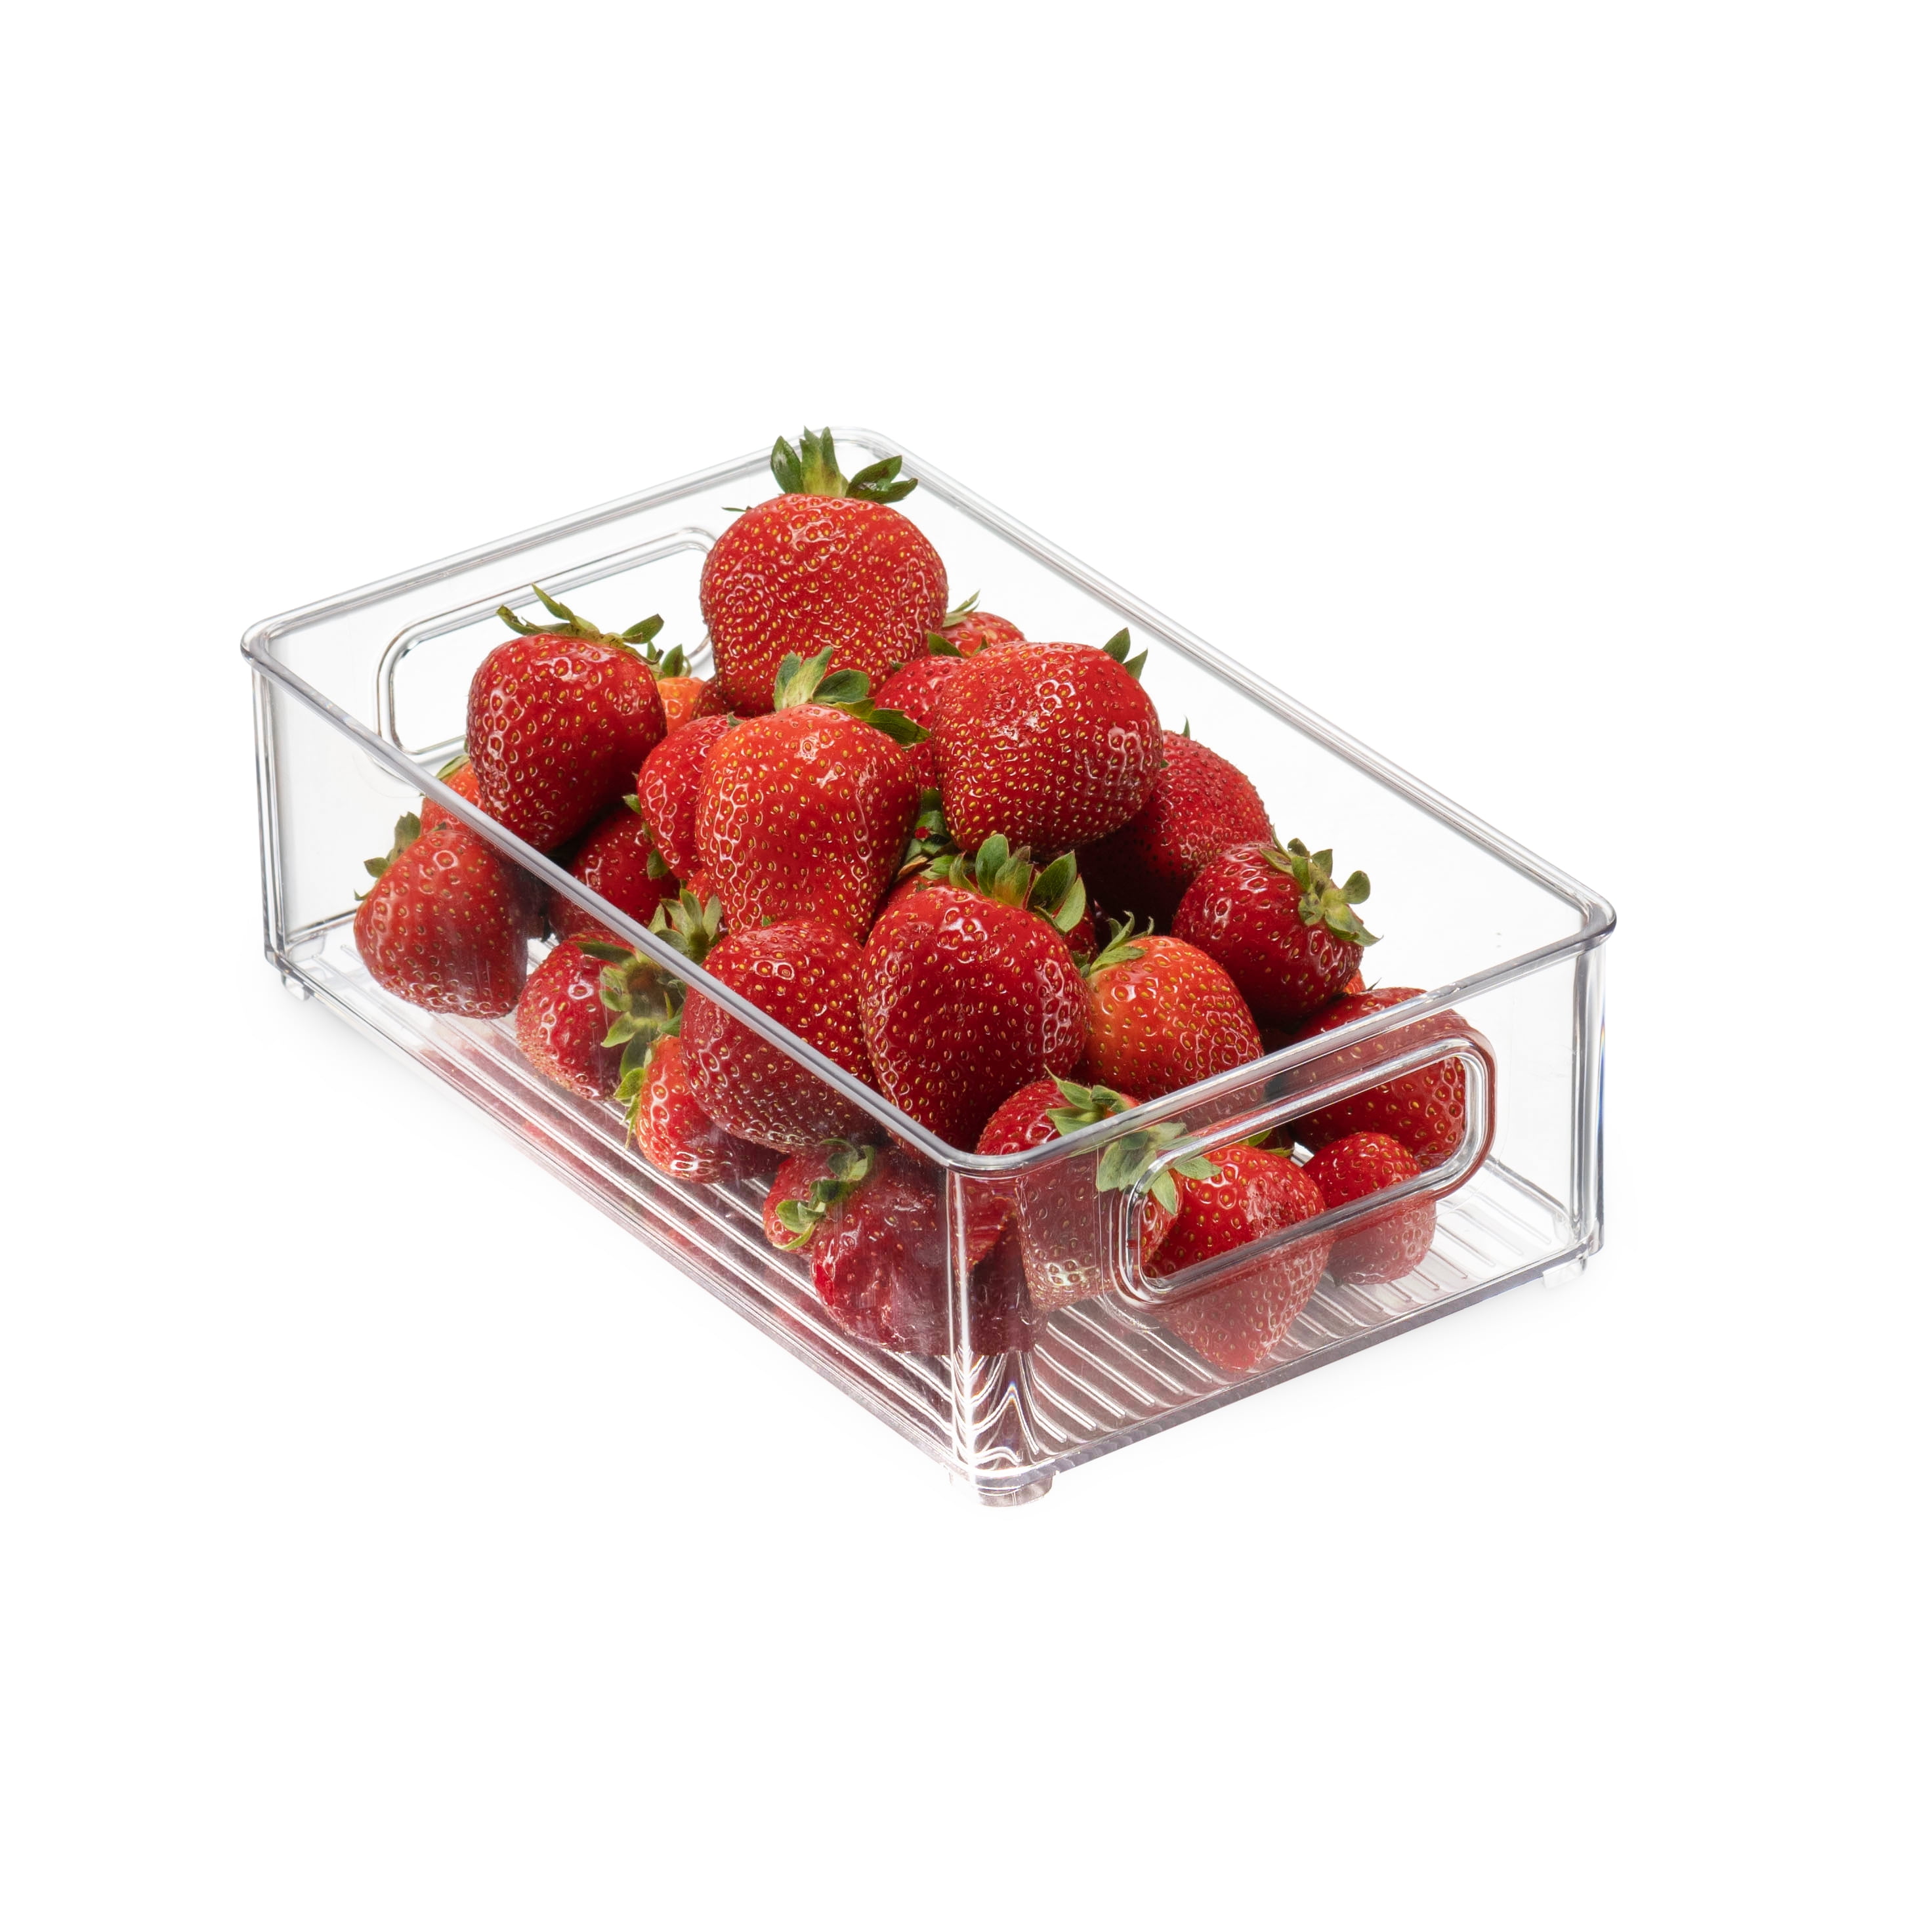 Lachesis Stackable Refrigerator Organizer Bins, Fridge Clear Bins with Handles Kitchen Organizer Fruit Container for Freezer, Pantry, Cabinets, Drawer